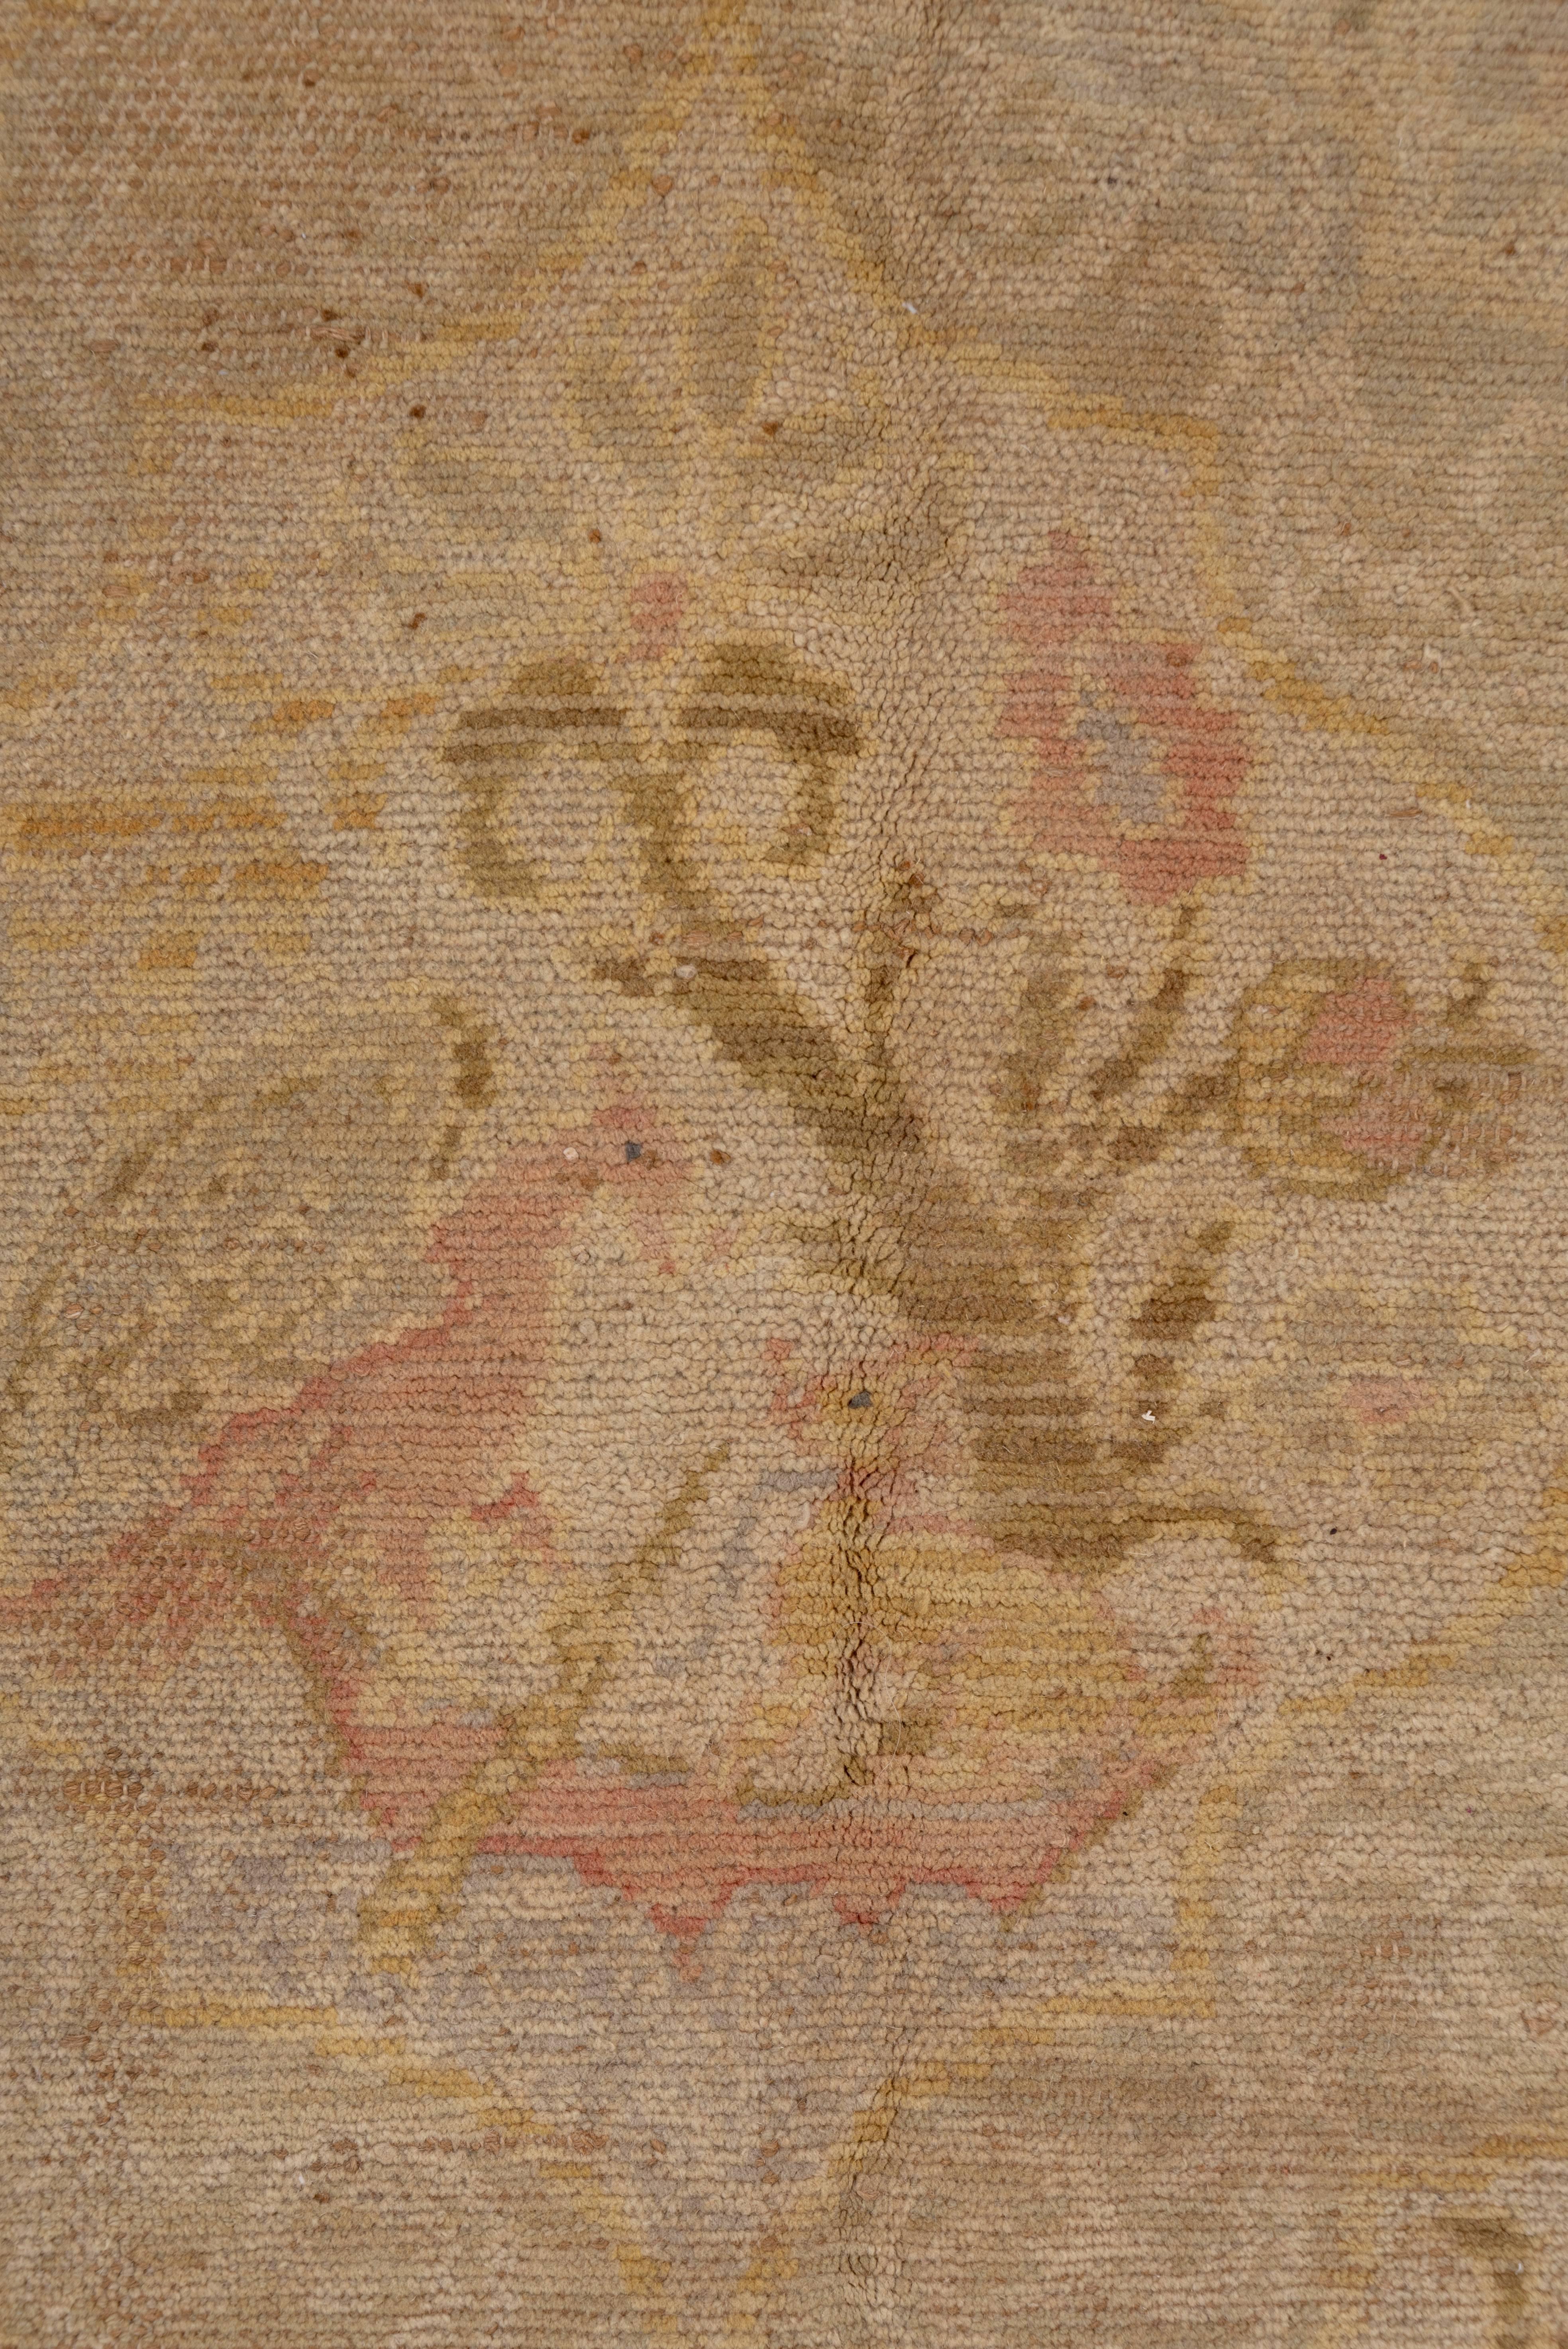 Early 20th Century Cuenca Rug In Excellent Condition For Sale In New York, NY